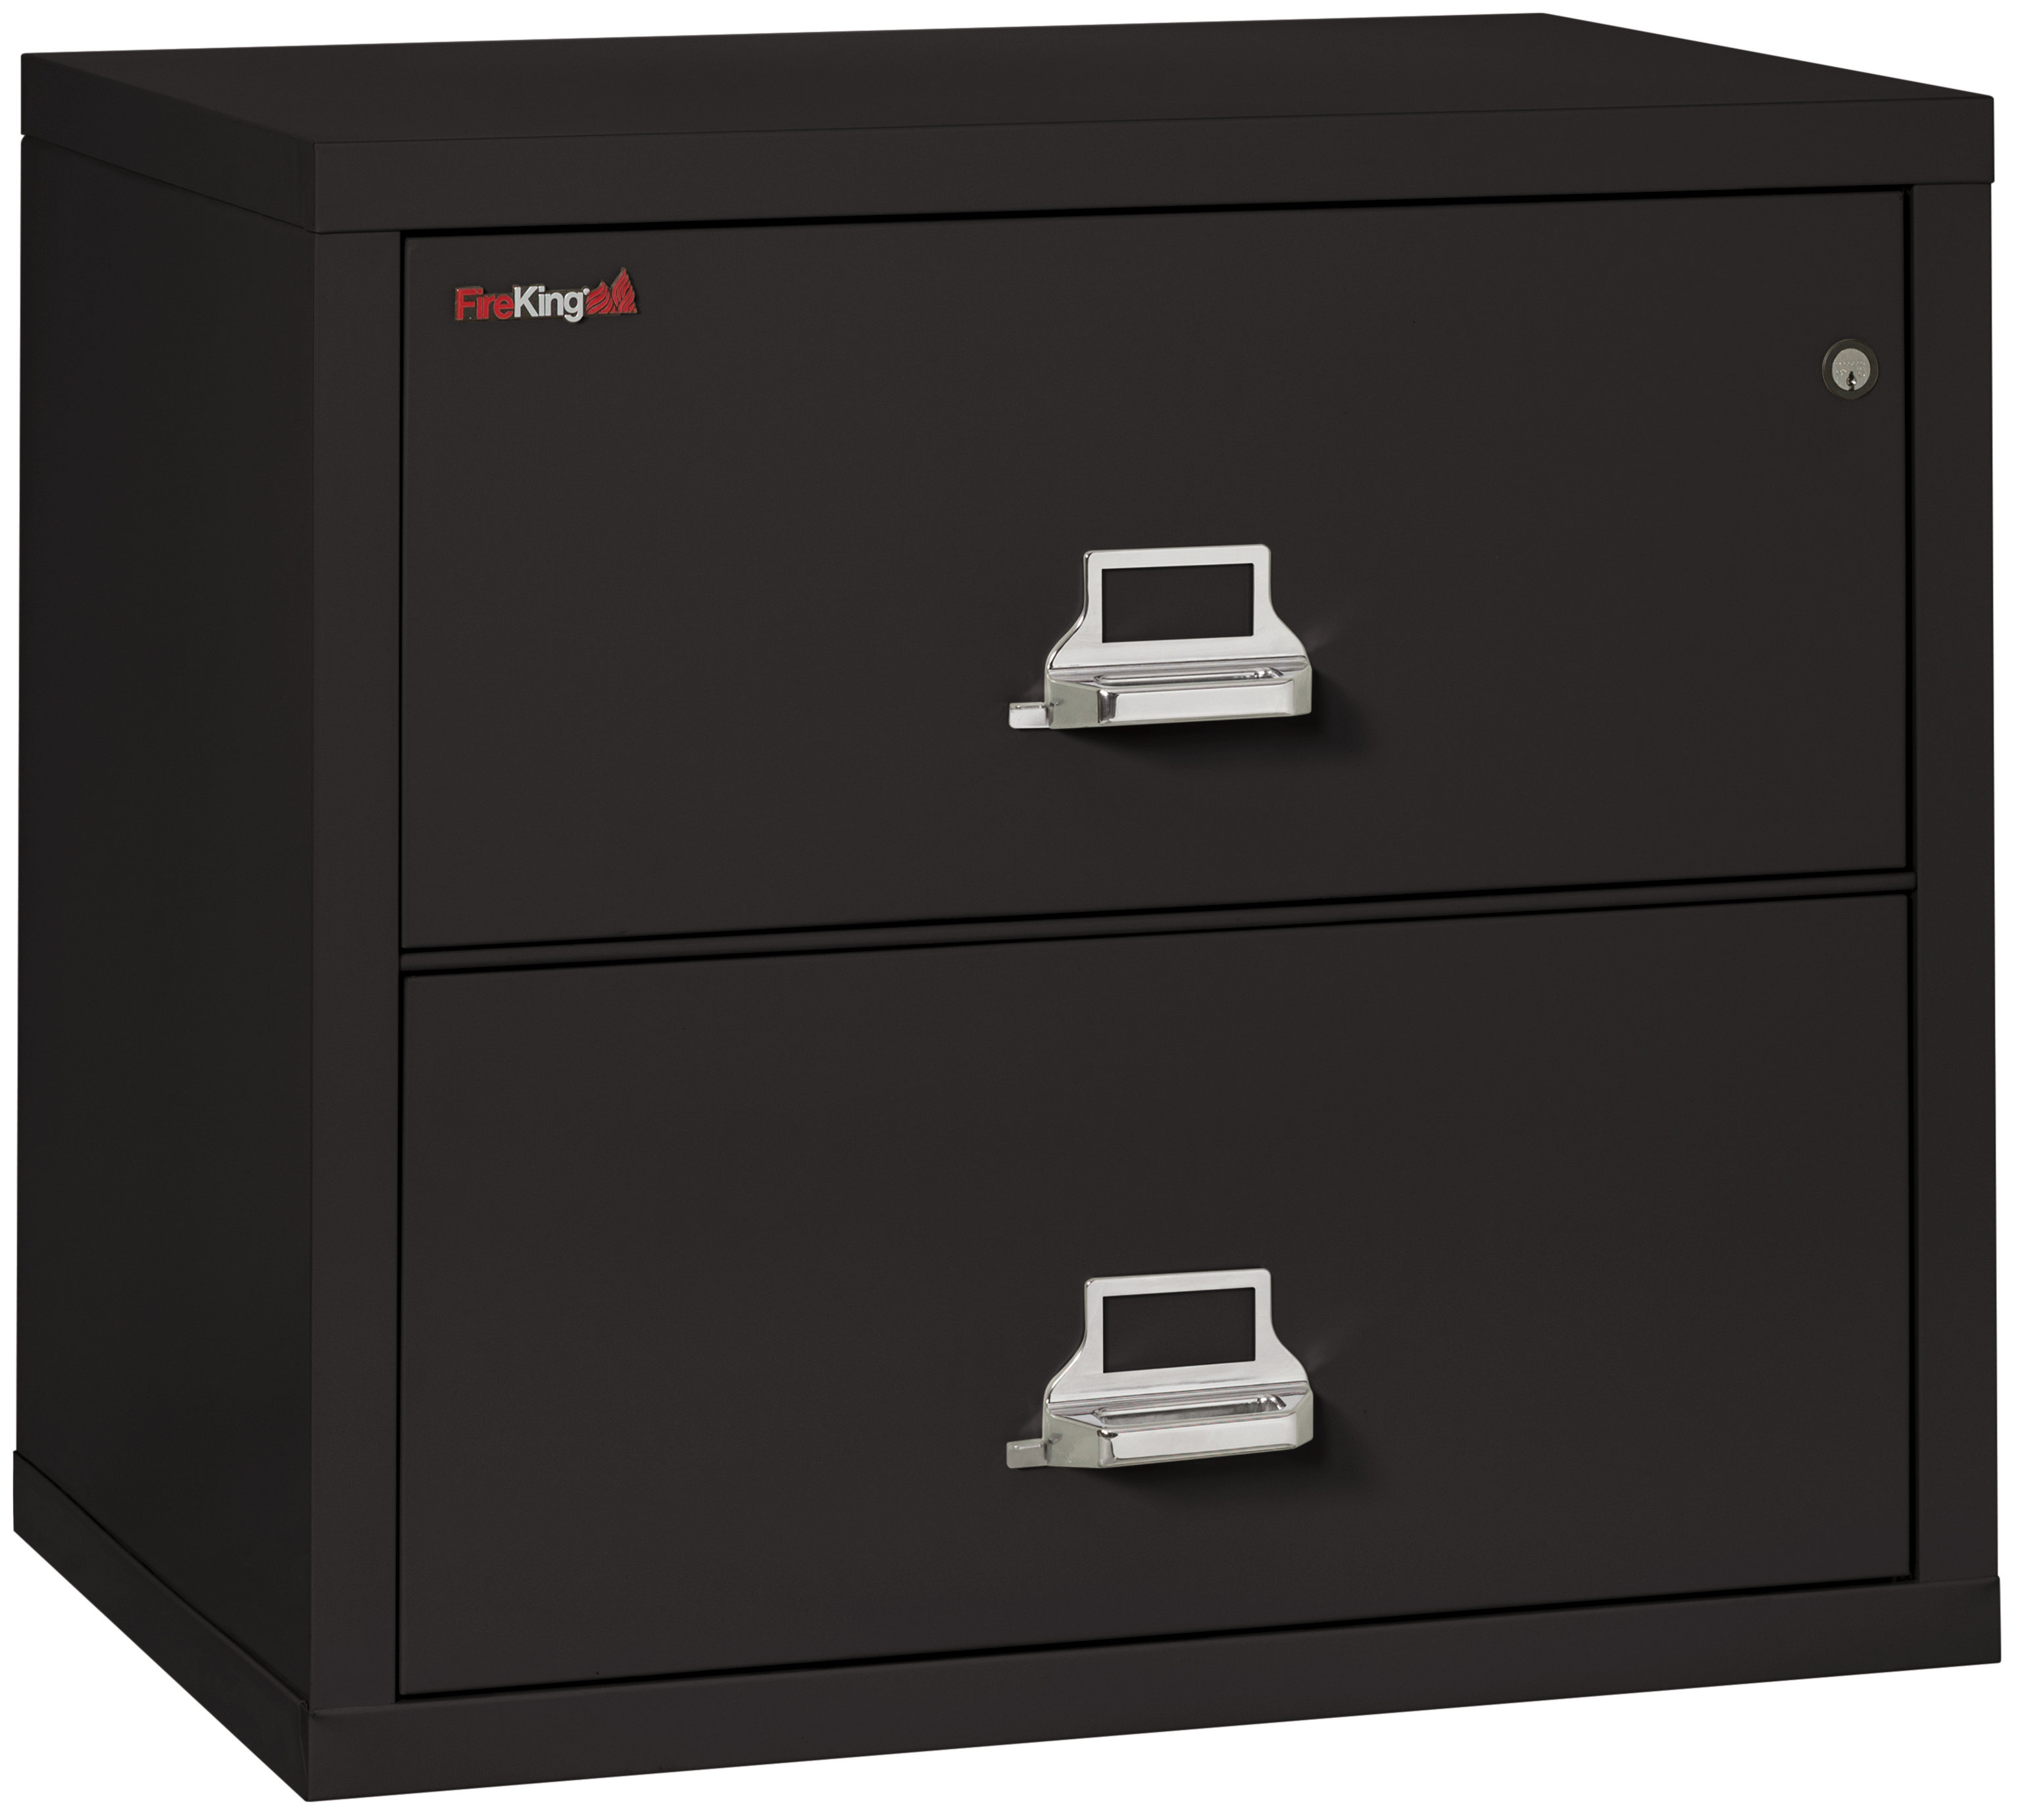 Fireking Fireproof 2 Drawer Lateral File Cabinet Wayfair in dimensions 3071 X 2767